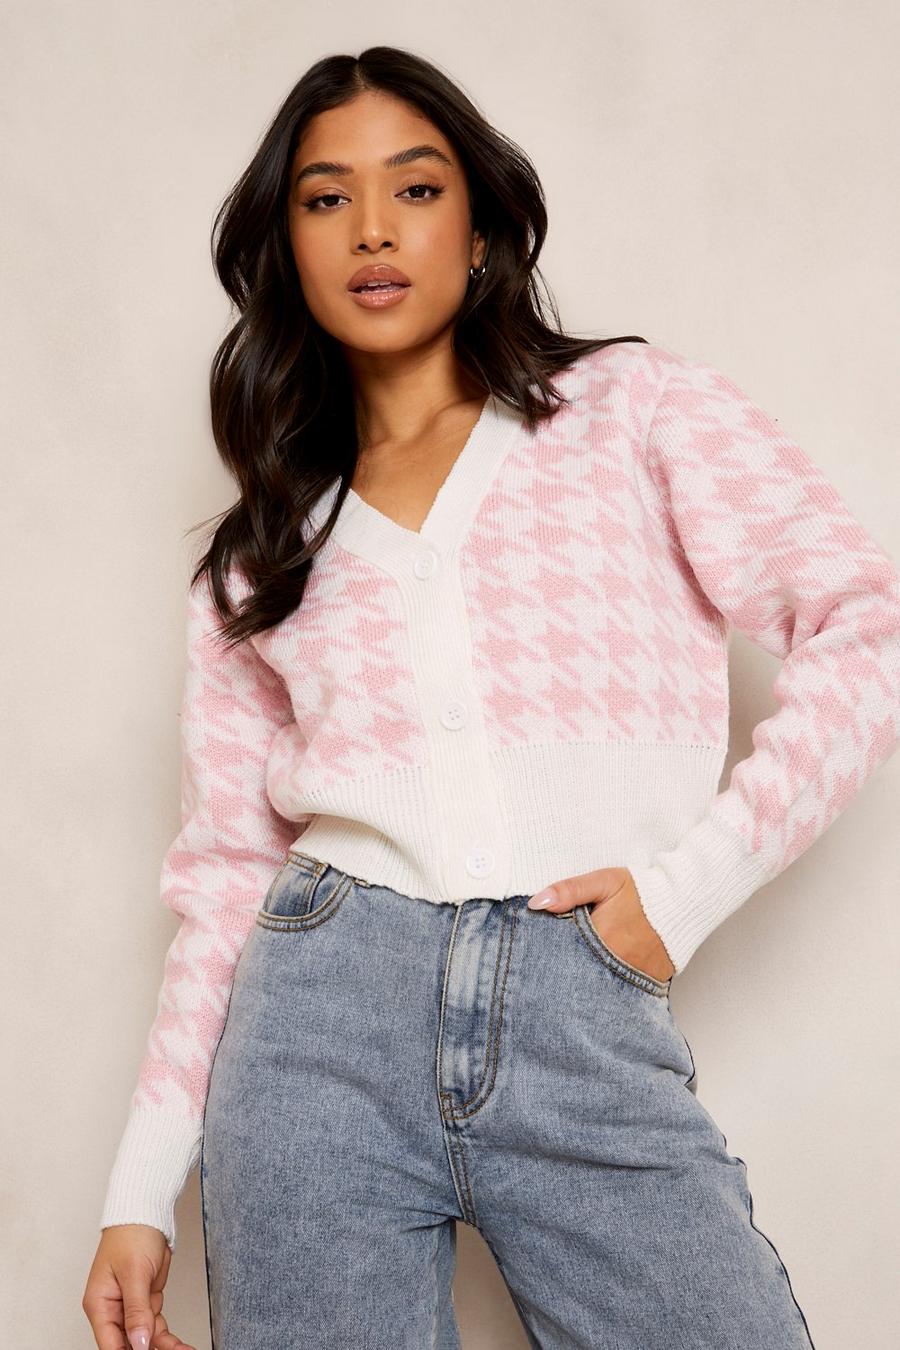 Pale pink rosa Petite Dogtooth Knitted Crop Top Cardigan